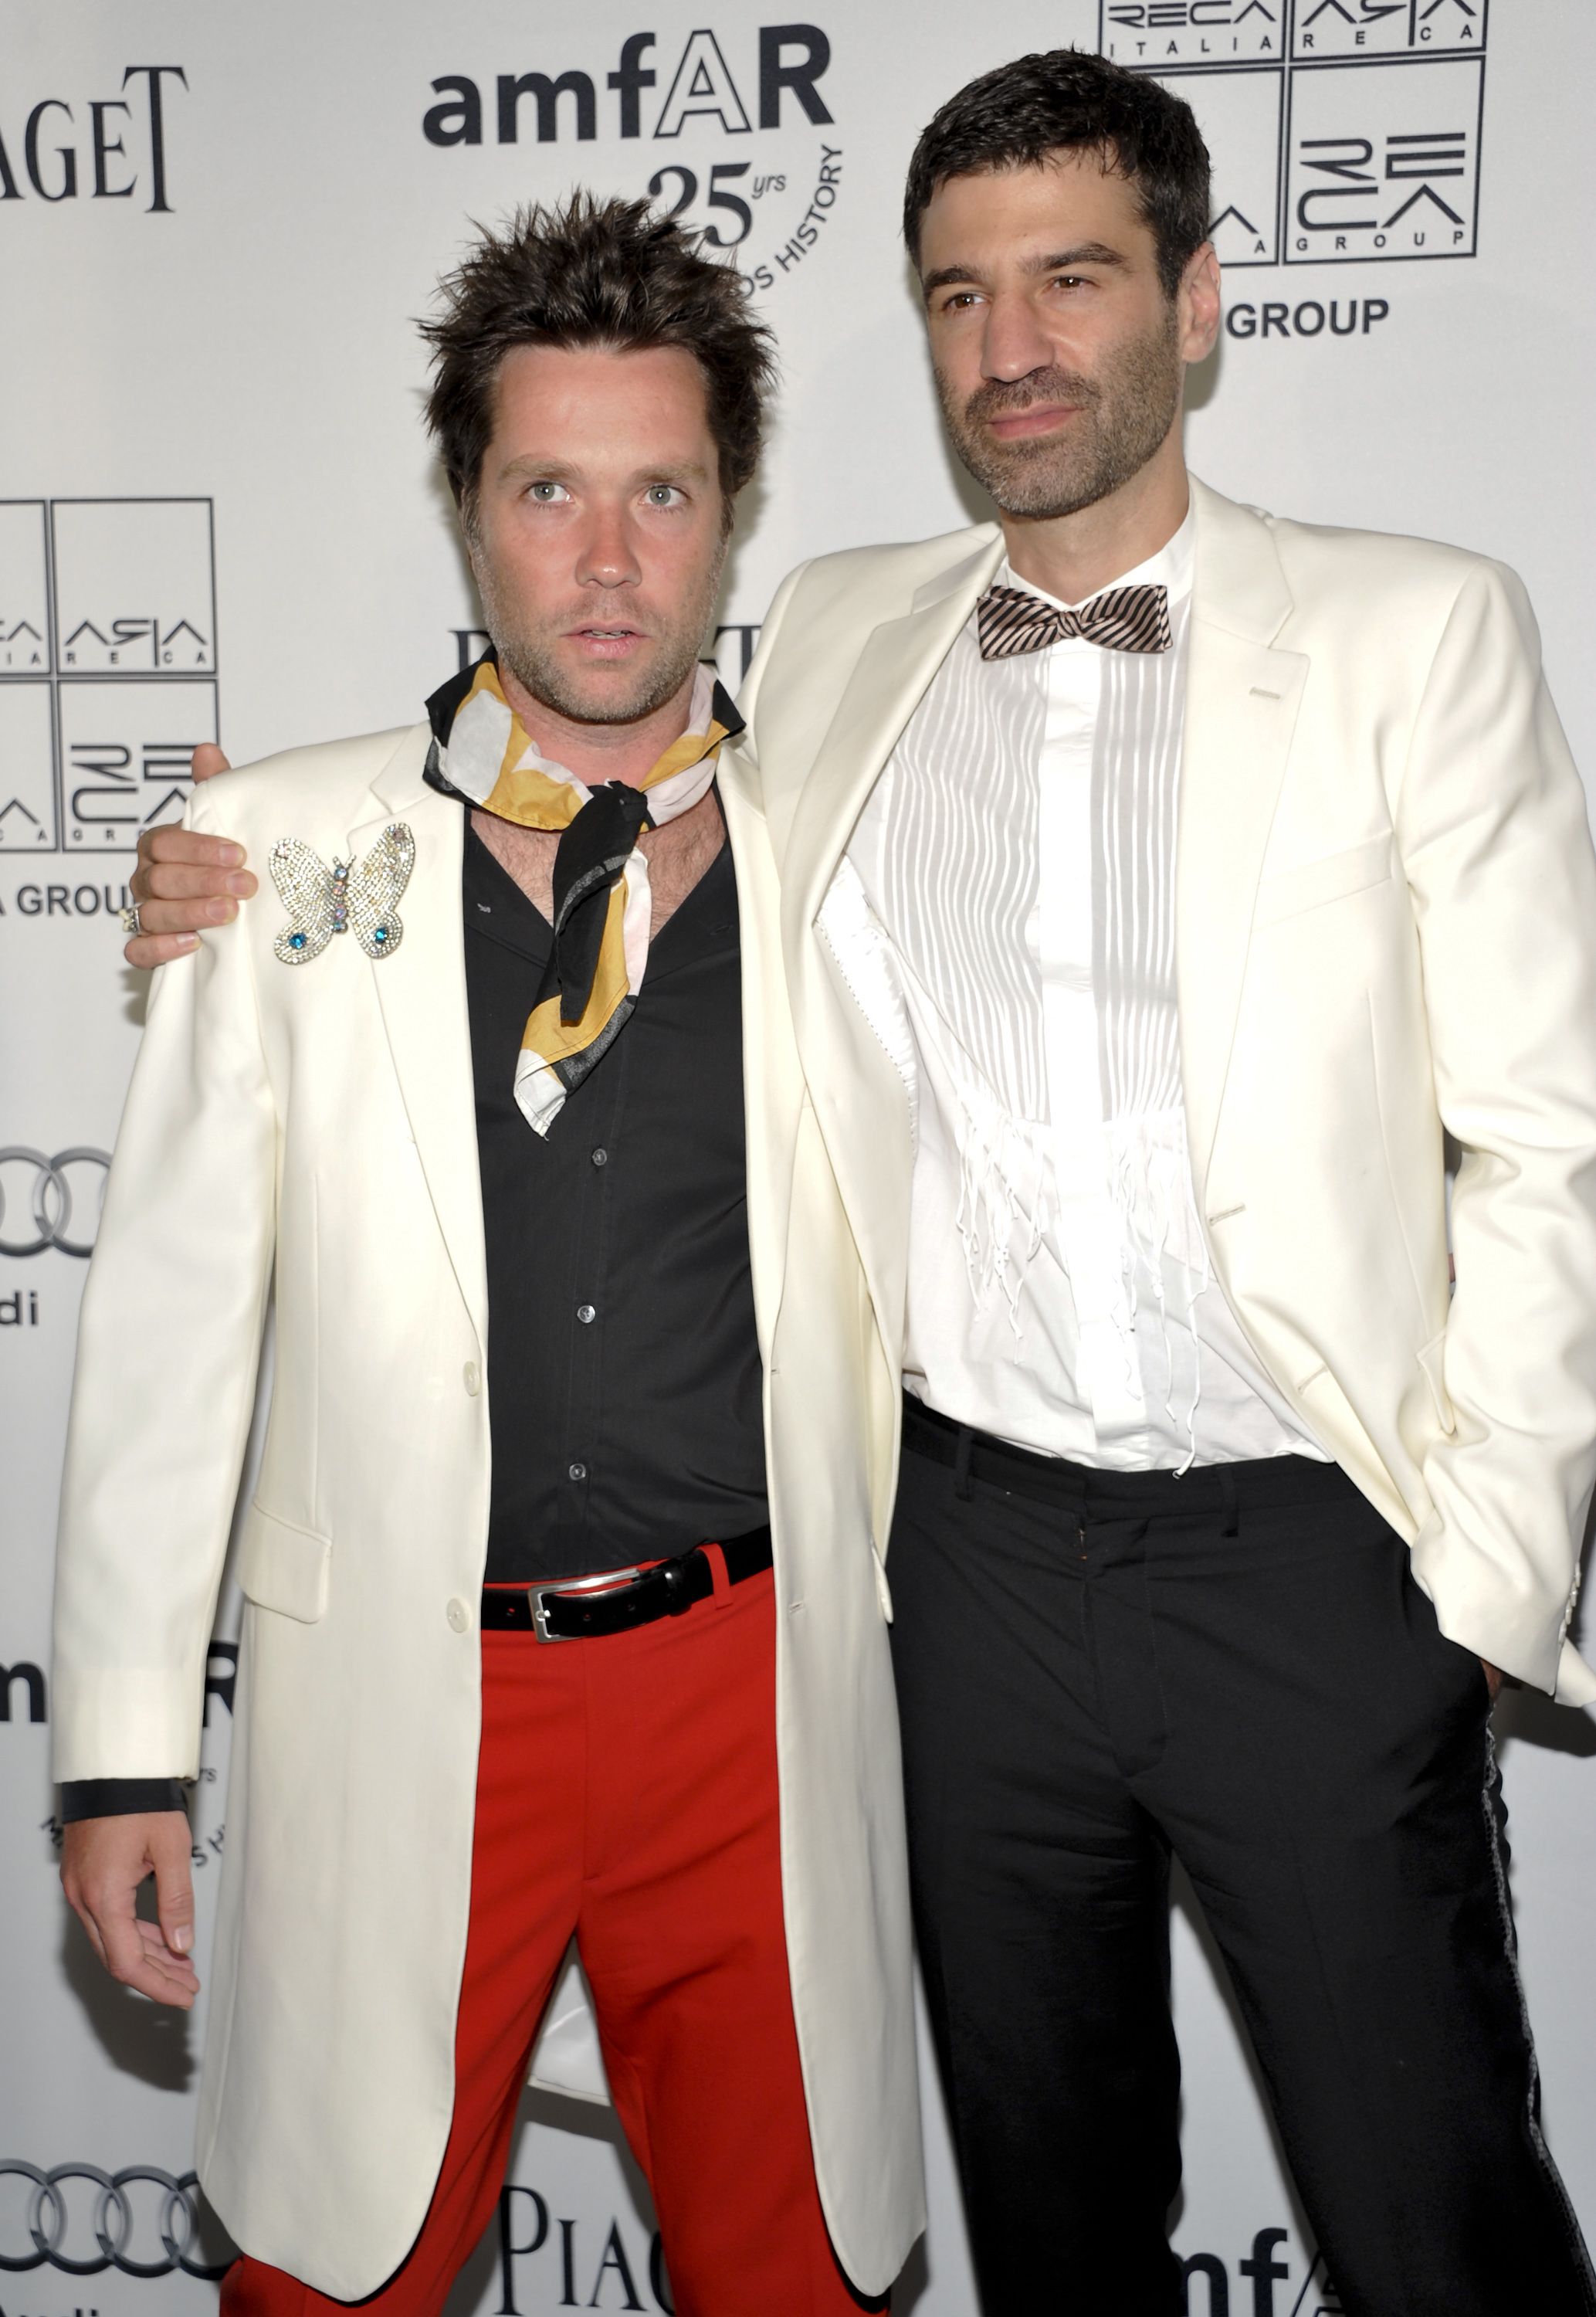 Rufus Wainwright marries partner picture